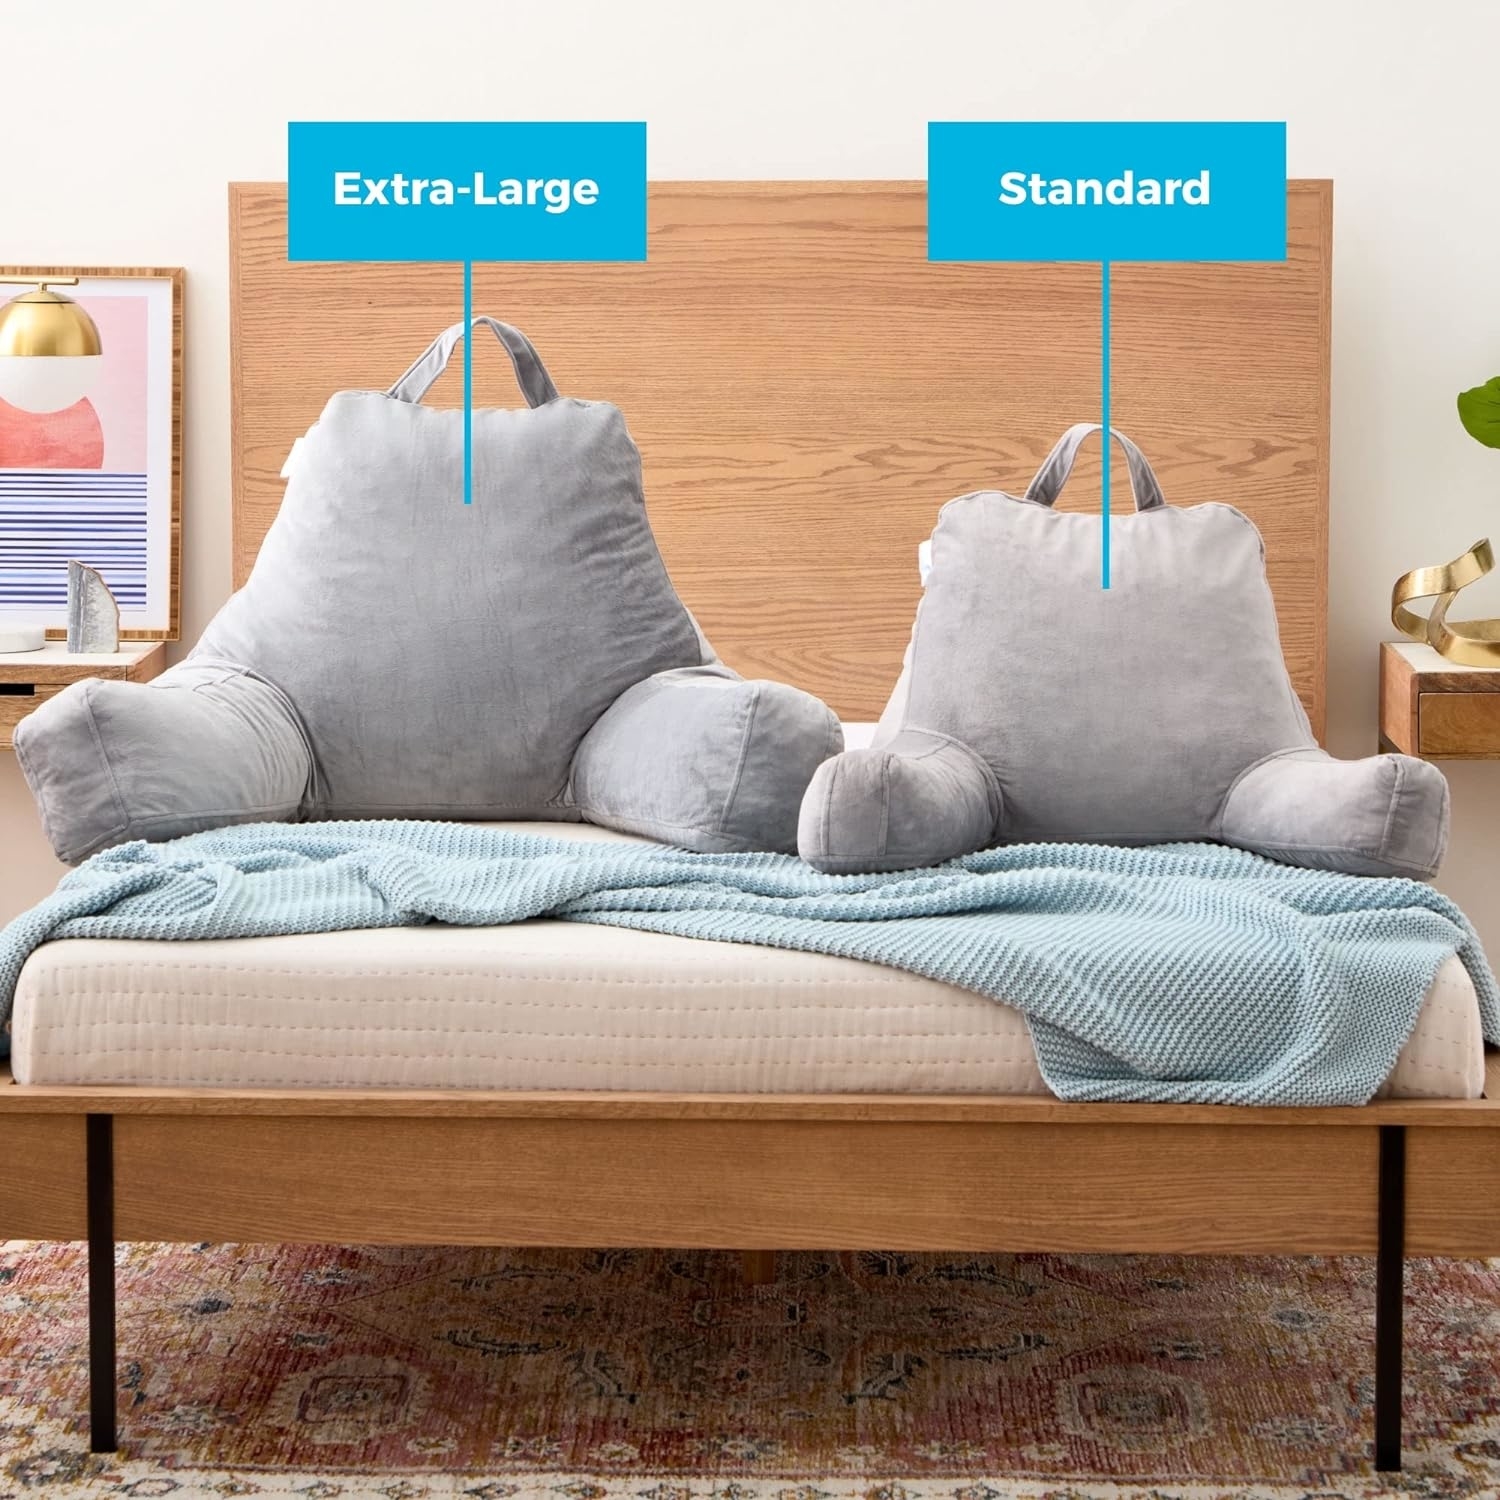 two gray pillows on a bed, one standard size and one extra large